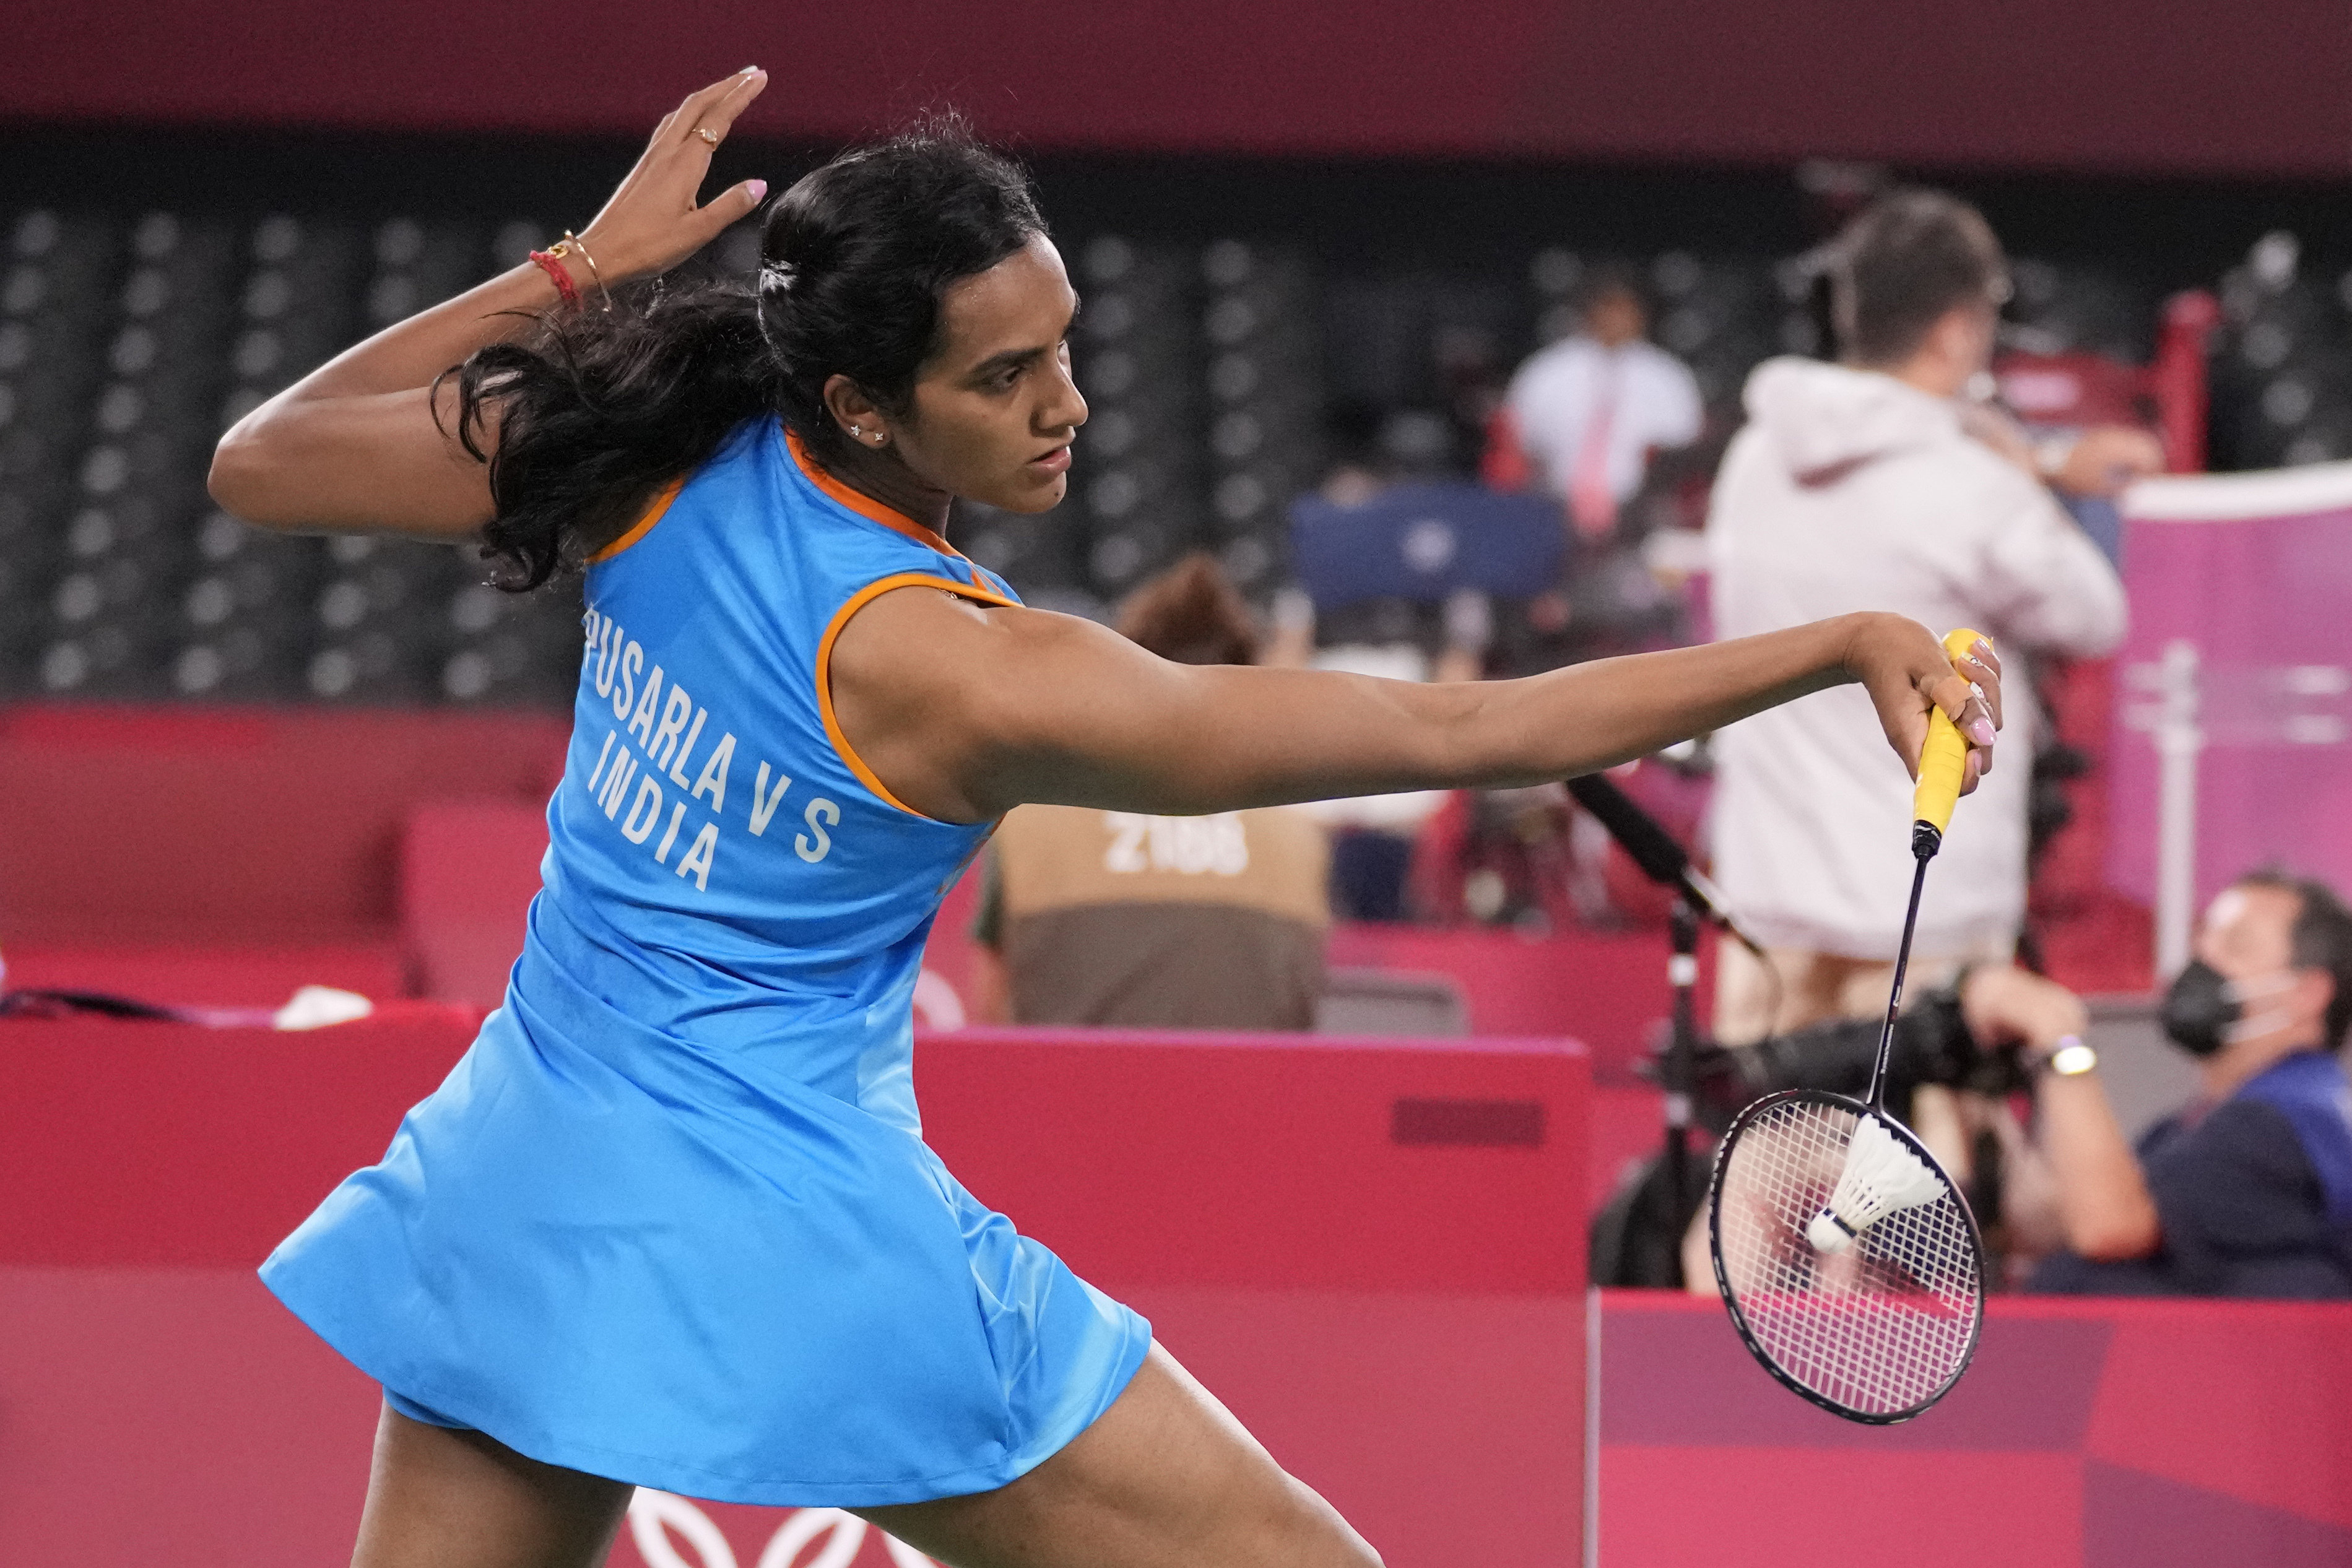 From dresses and skorts to hijabs, badminton's women wear what they like